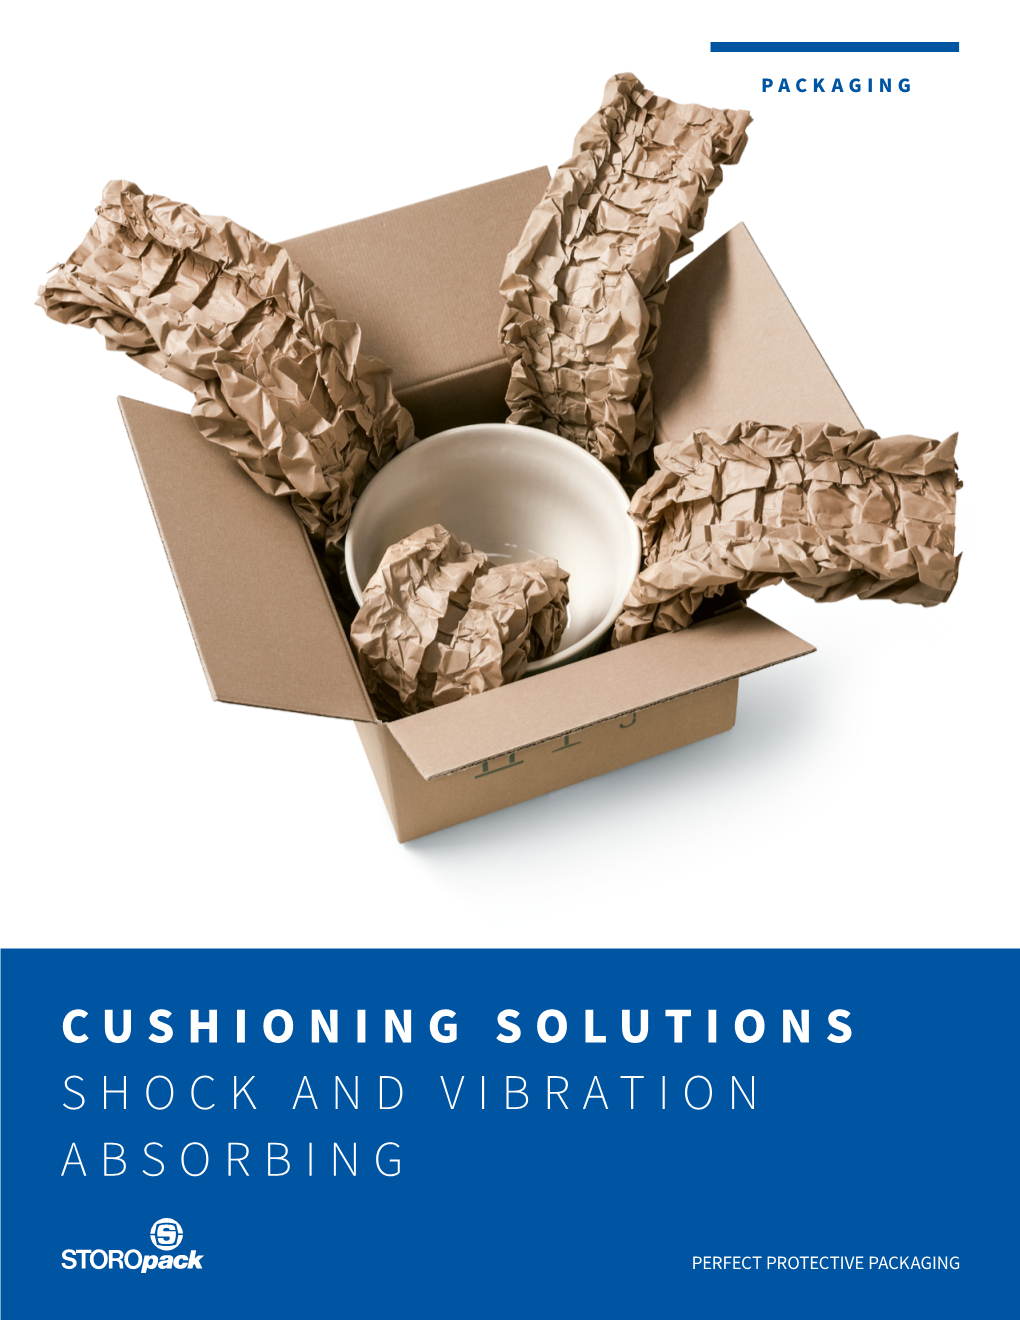 Cushioning Solutions Shock and Vibration Absorbing Flexibility I S When the Packaging Adapts to the Goods and Not the Other Way Around